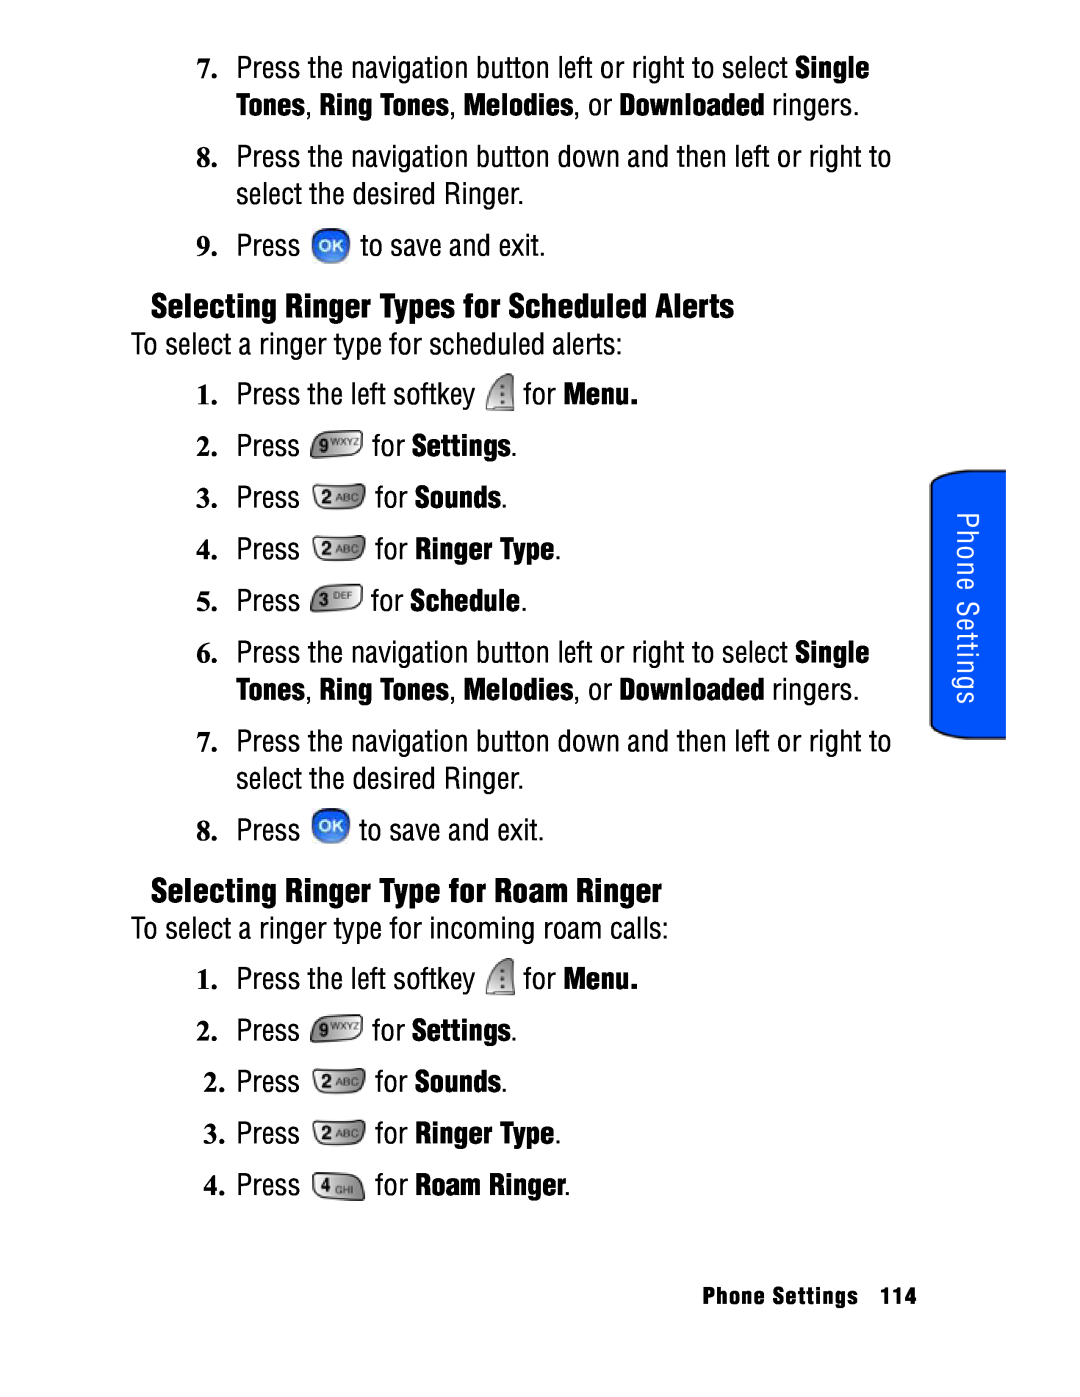 Samsung SPH-a740 manual Selecting Ringer Types for Scheduled Alerts, Selecting Ringer Type for Roam Ringer, Phone Settings 